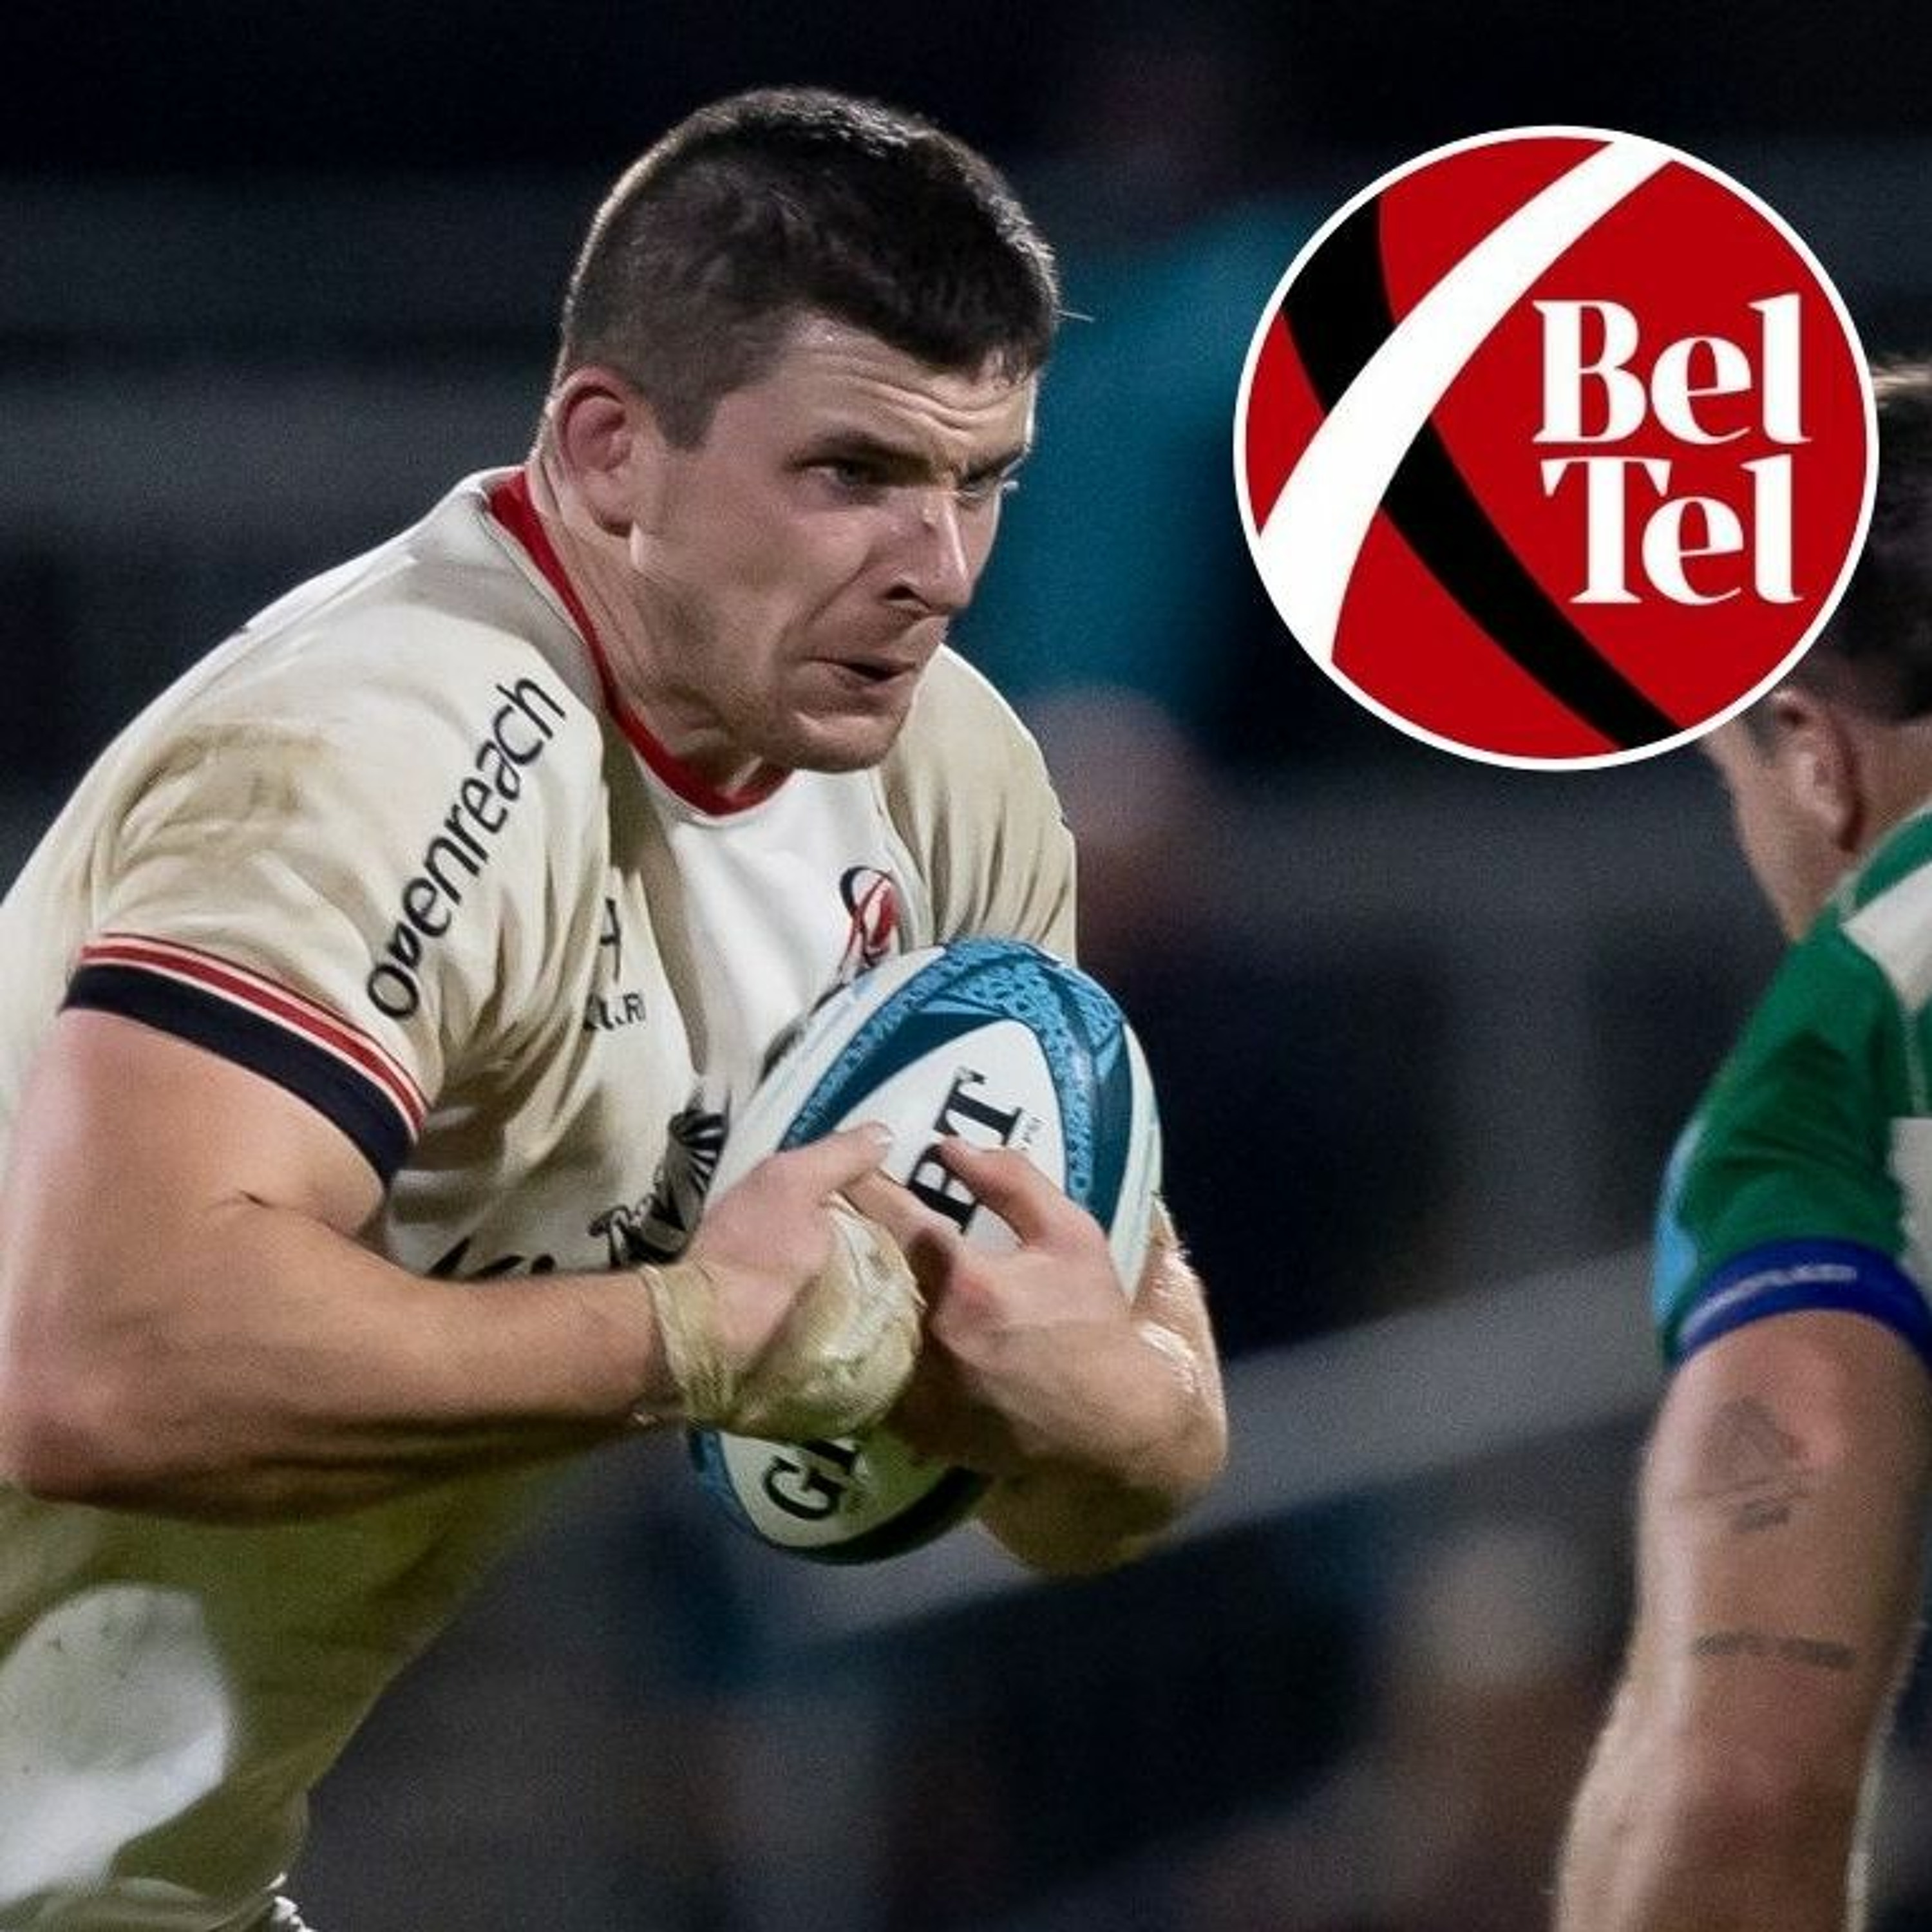 Nick Timoney's try-scoring machine, Rory Best's coaching move and what to expect from Ireland squad